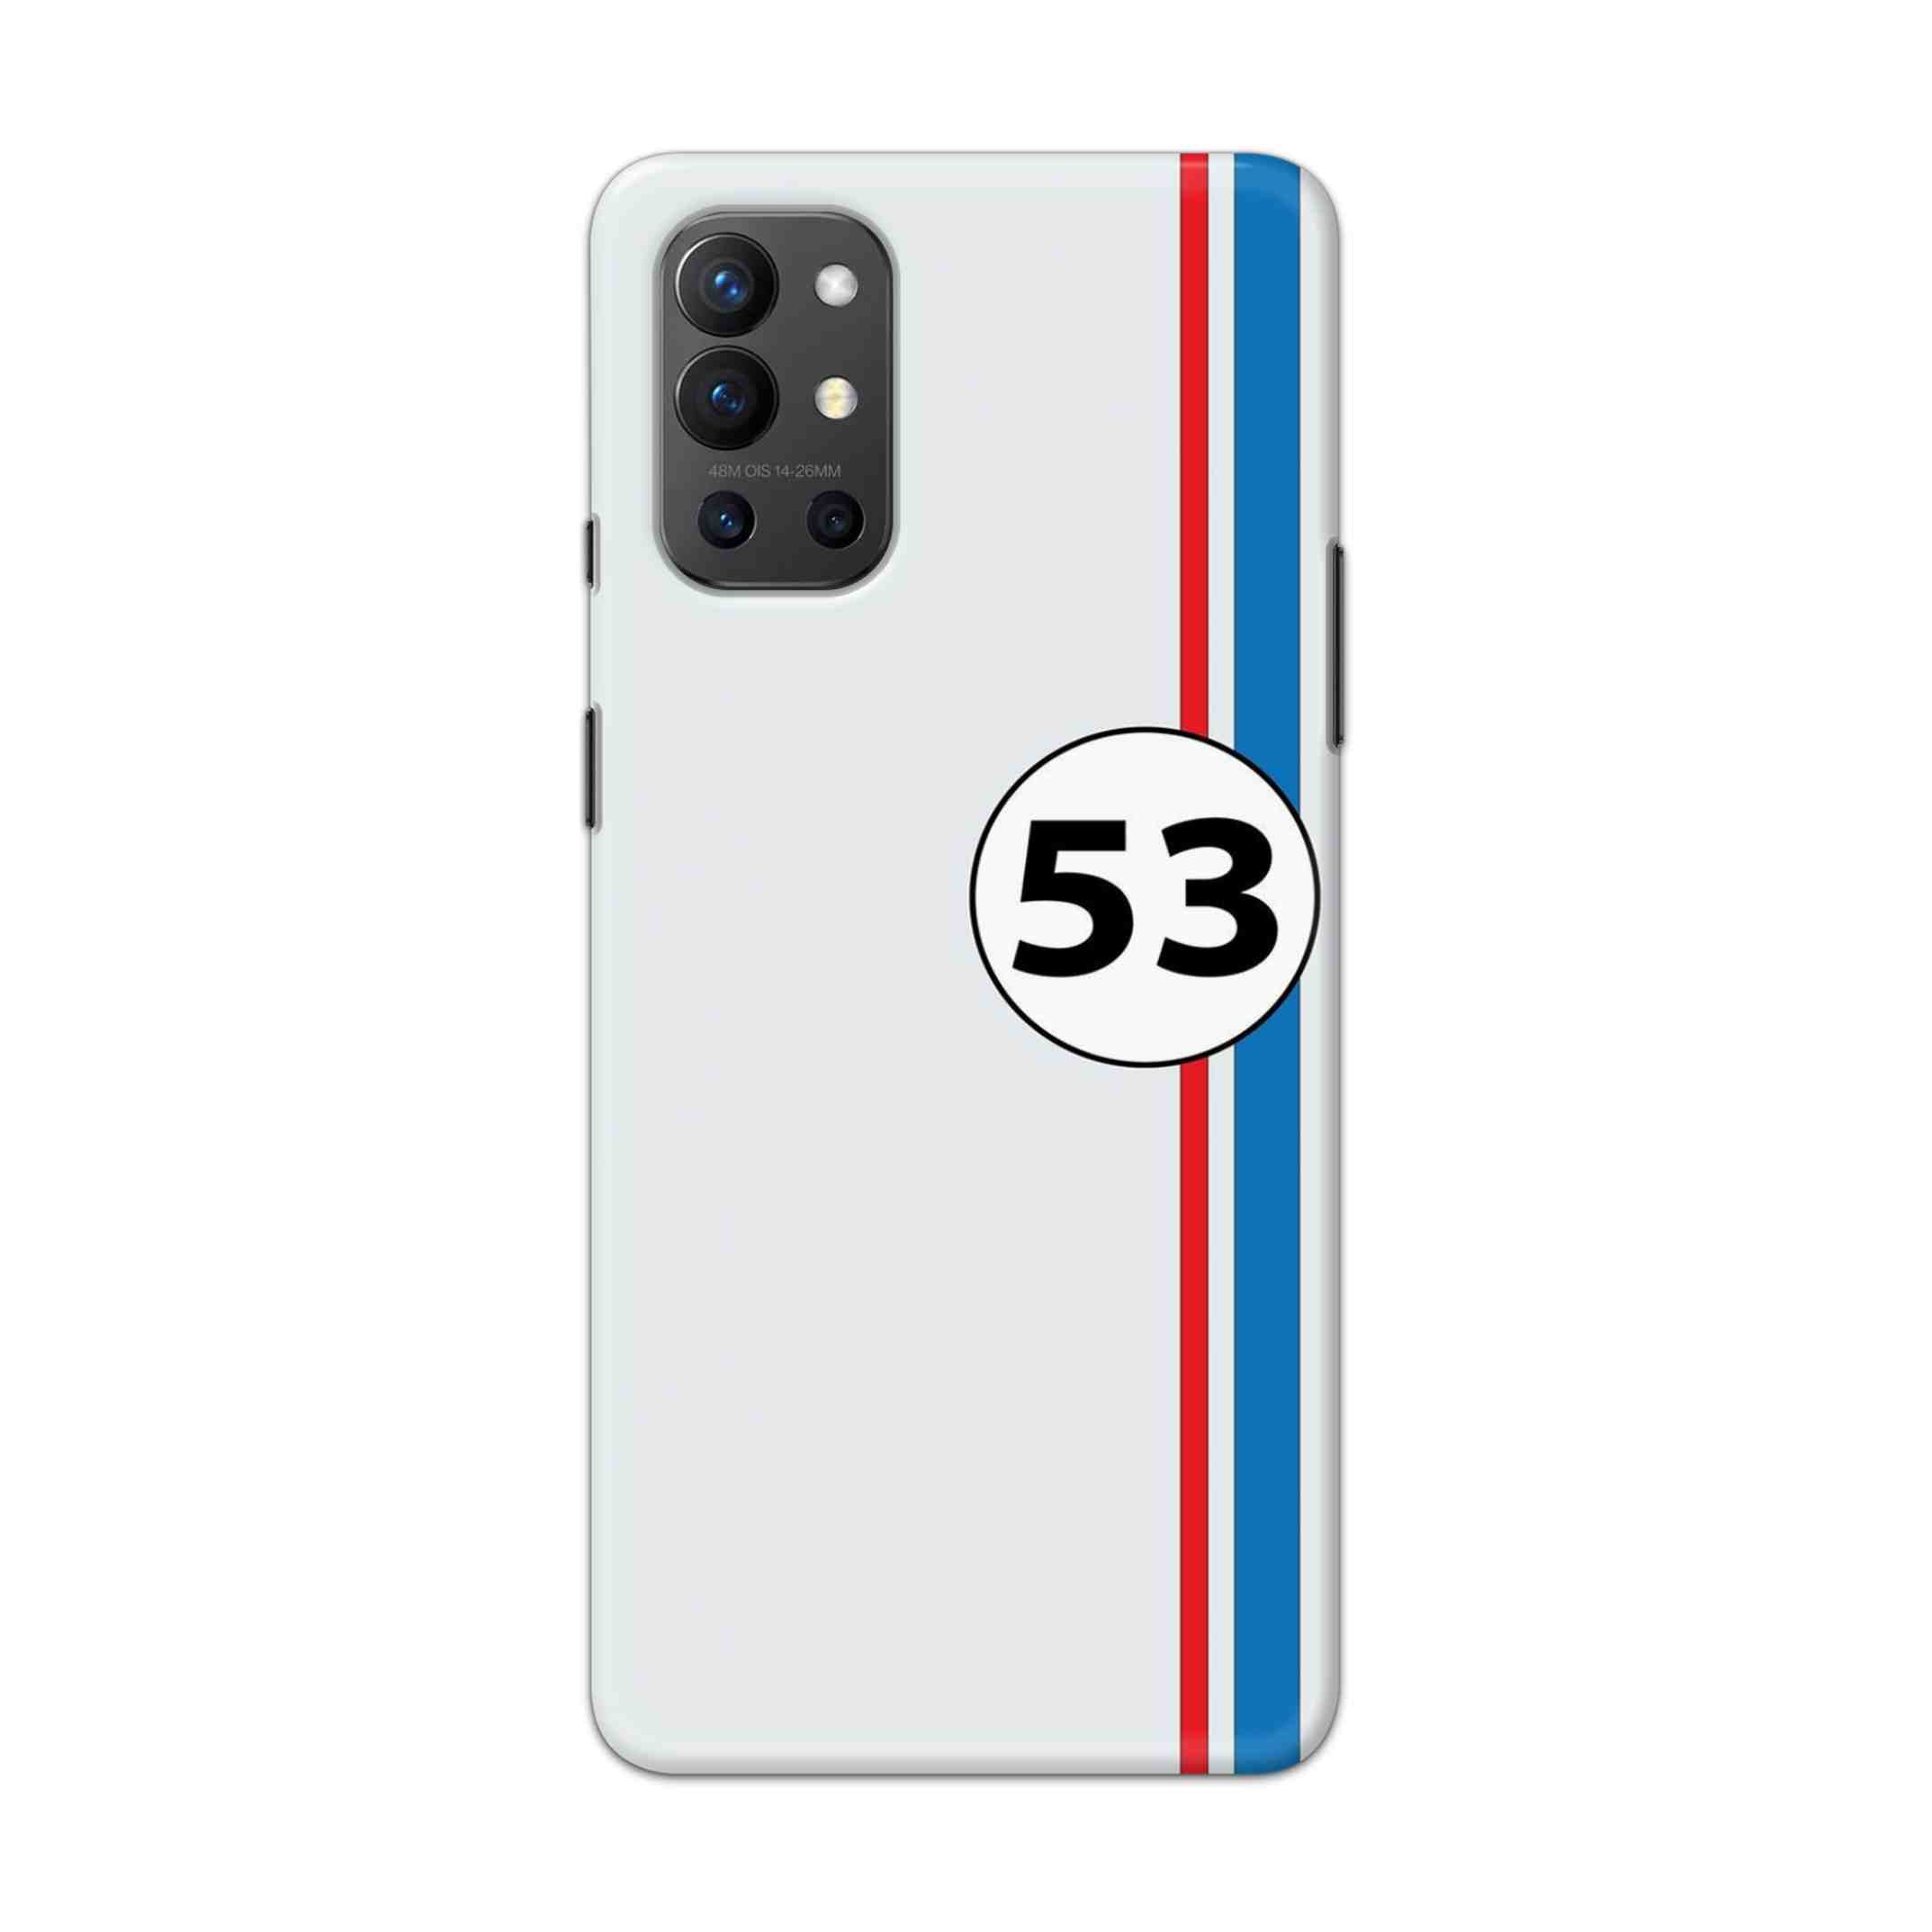 Buy 53 Hard Back Mobile Phone Case Cover For OnePlus 9R / 8T Online